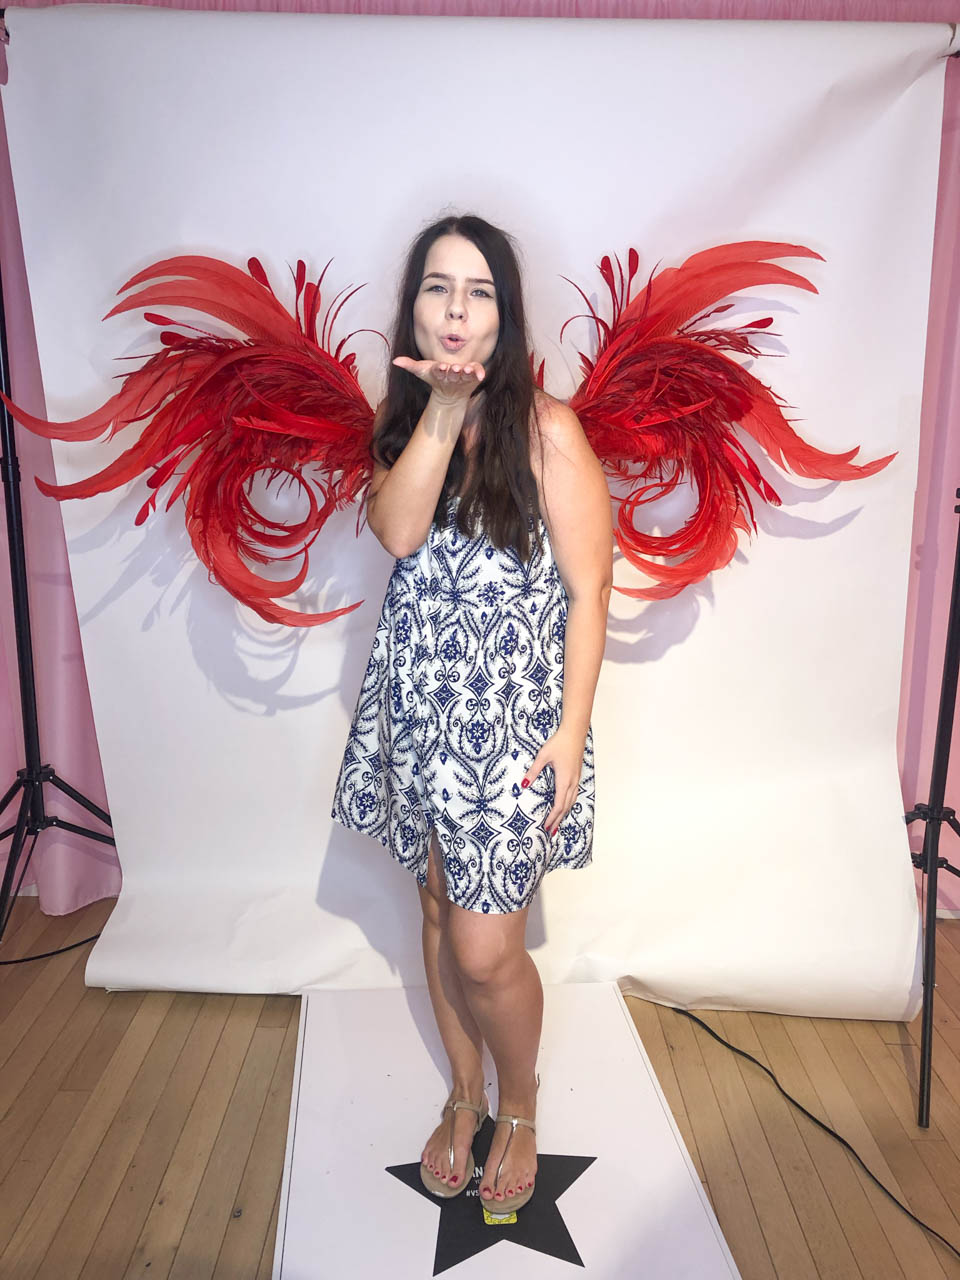 A girl in a patterned dress posing with the Victoria's Secret angel wings and blowing a kiss towards the camera